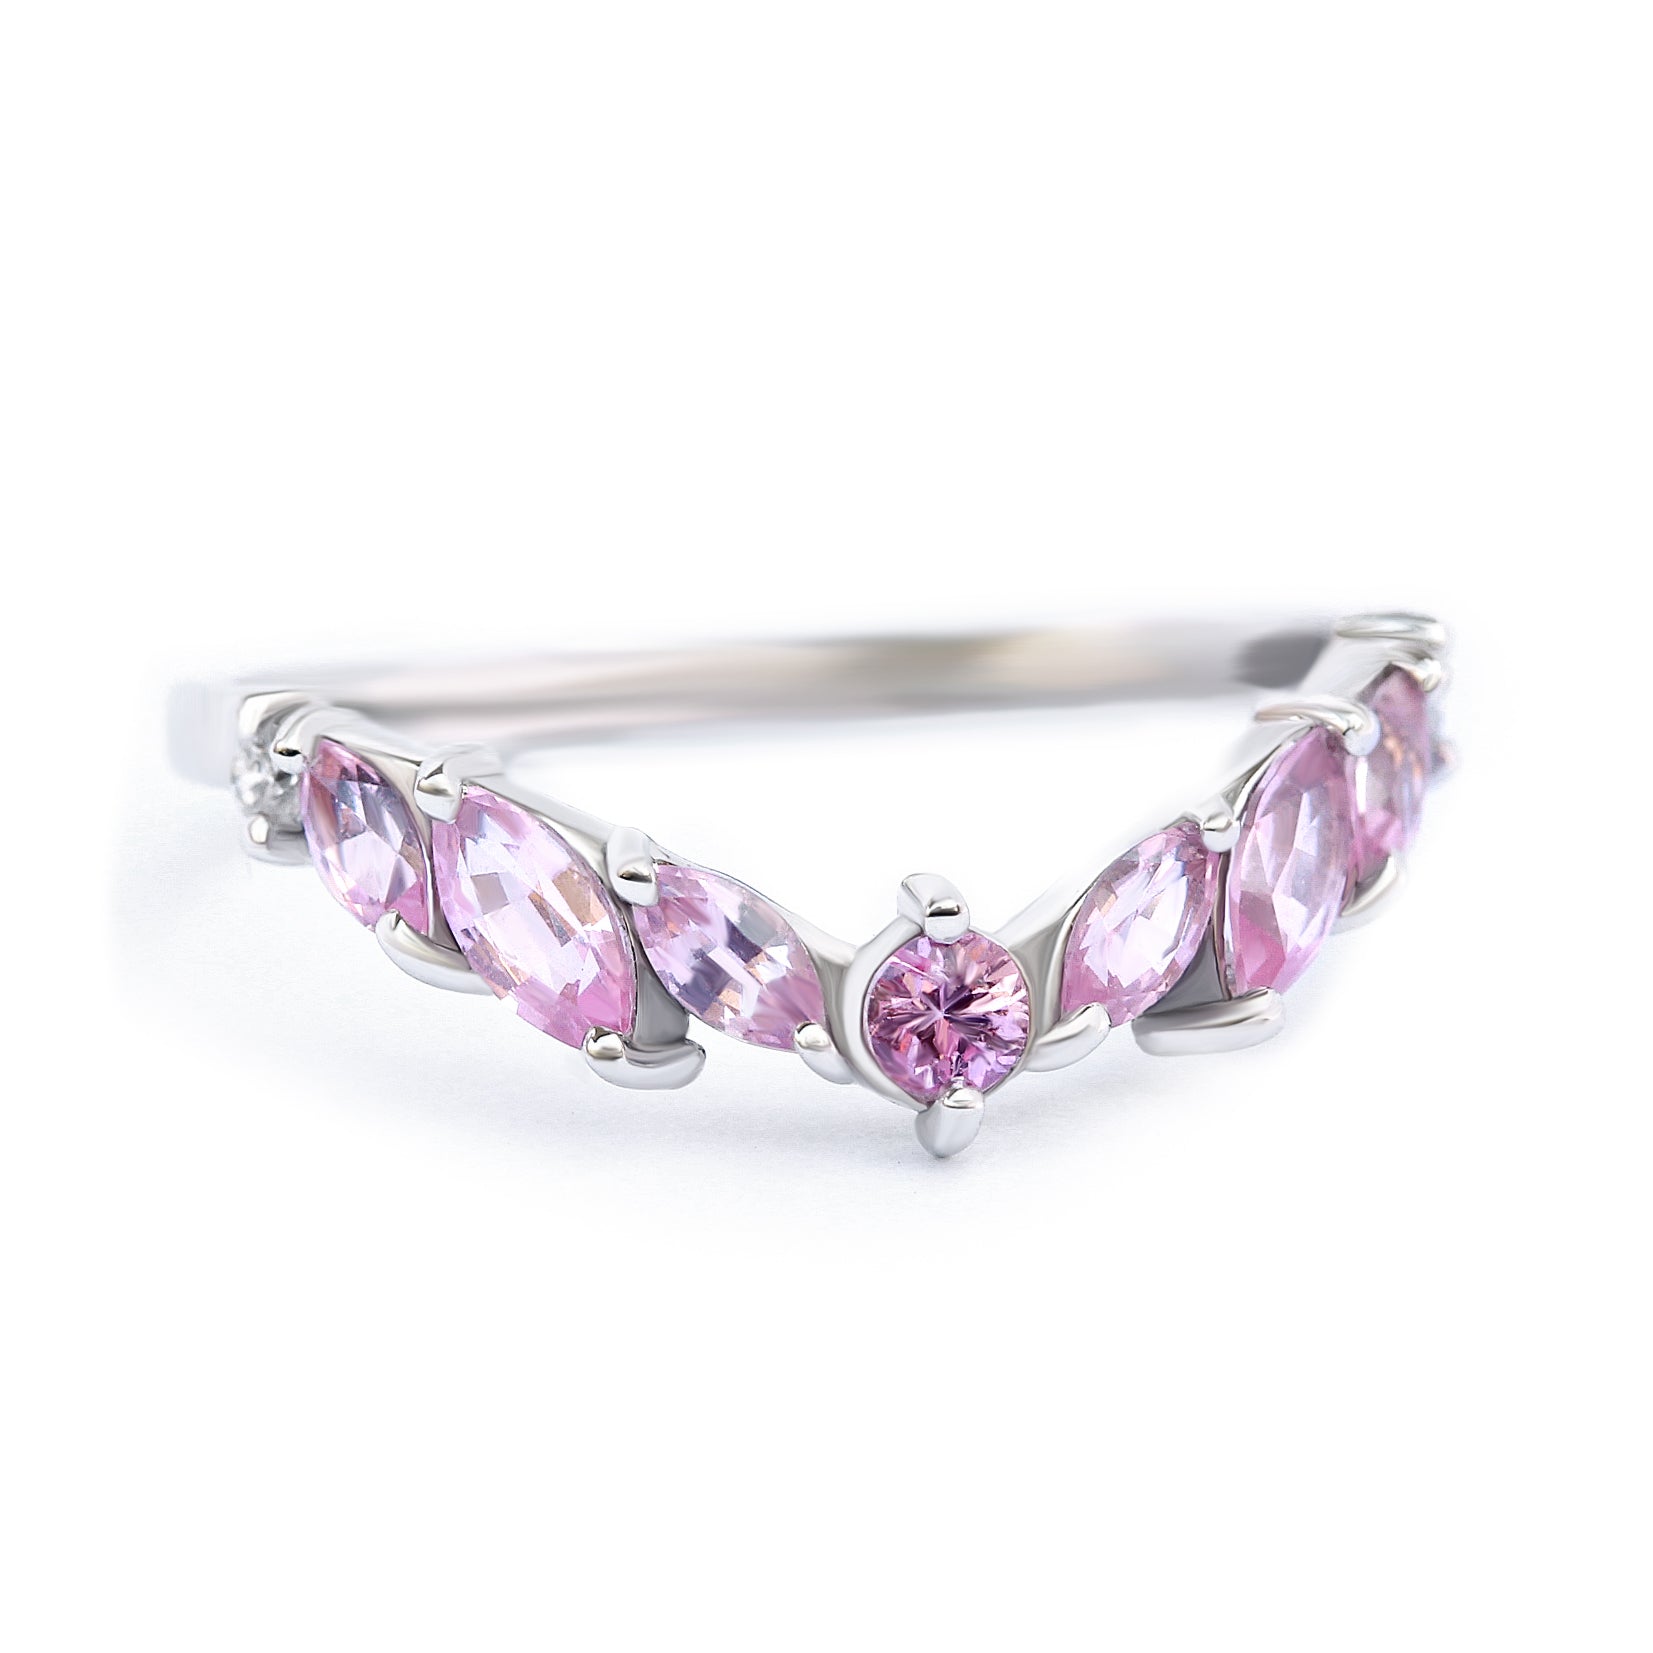 OOAK Marquise pink Spinel & Sapphire Crown nesting v ring, Pinkie - Ready to ship in 14K white gold & size 6.5